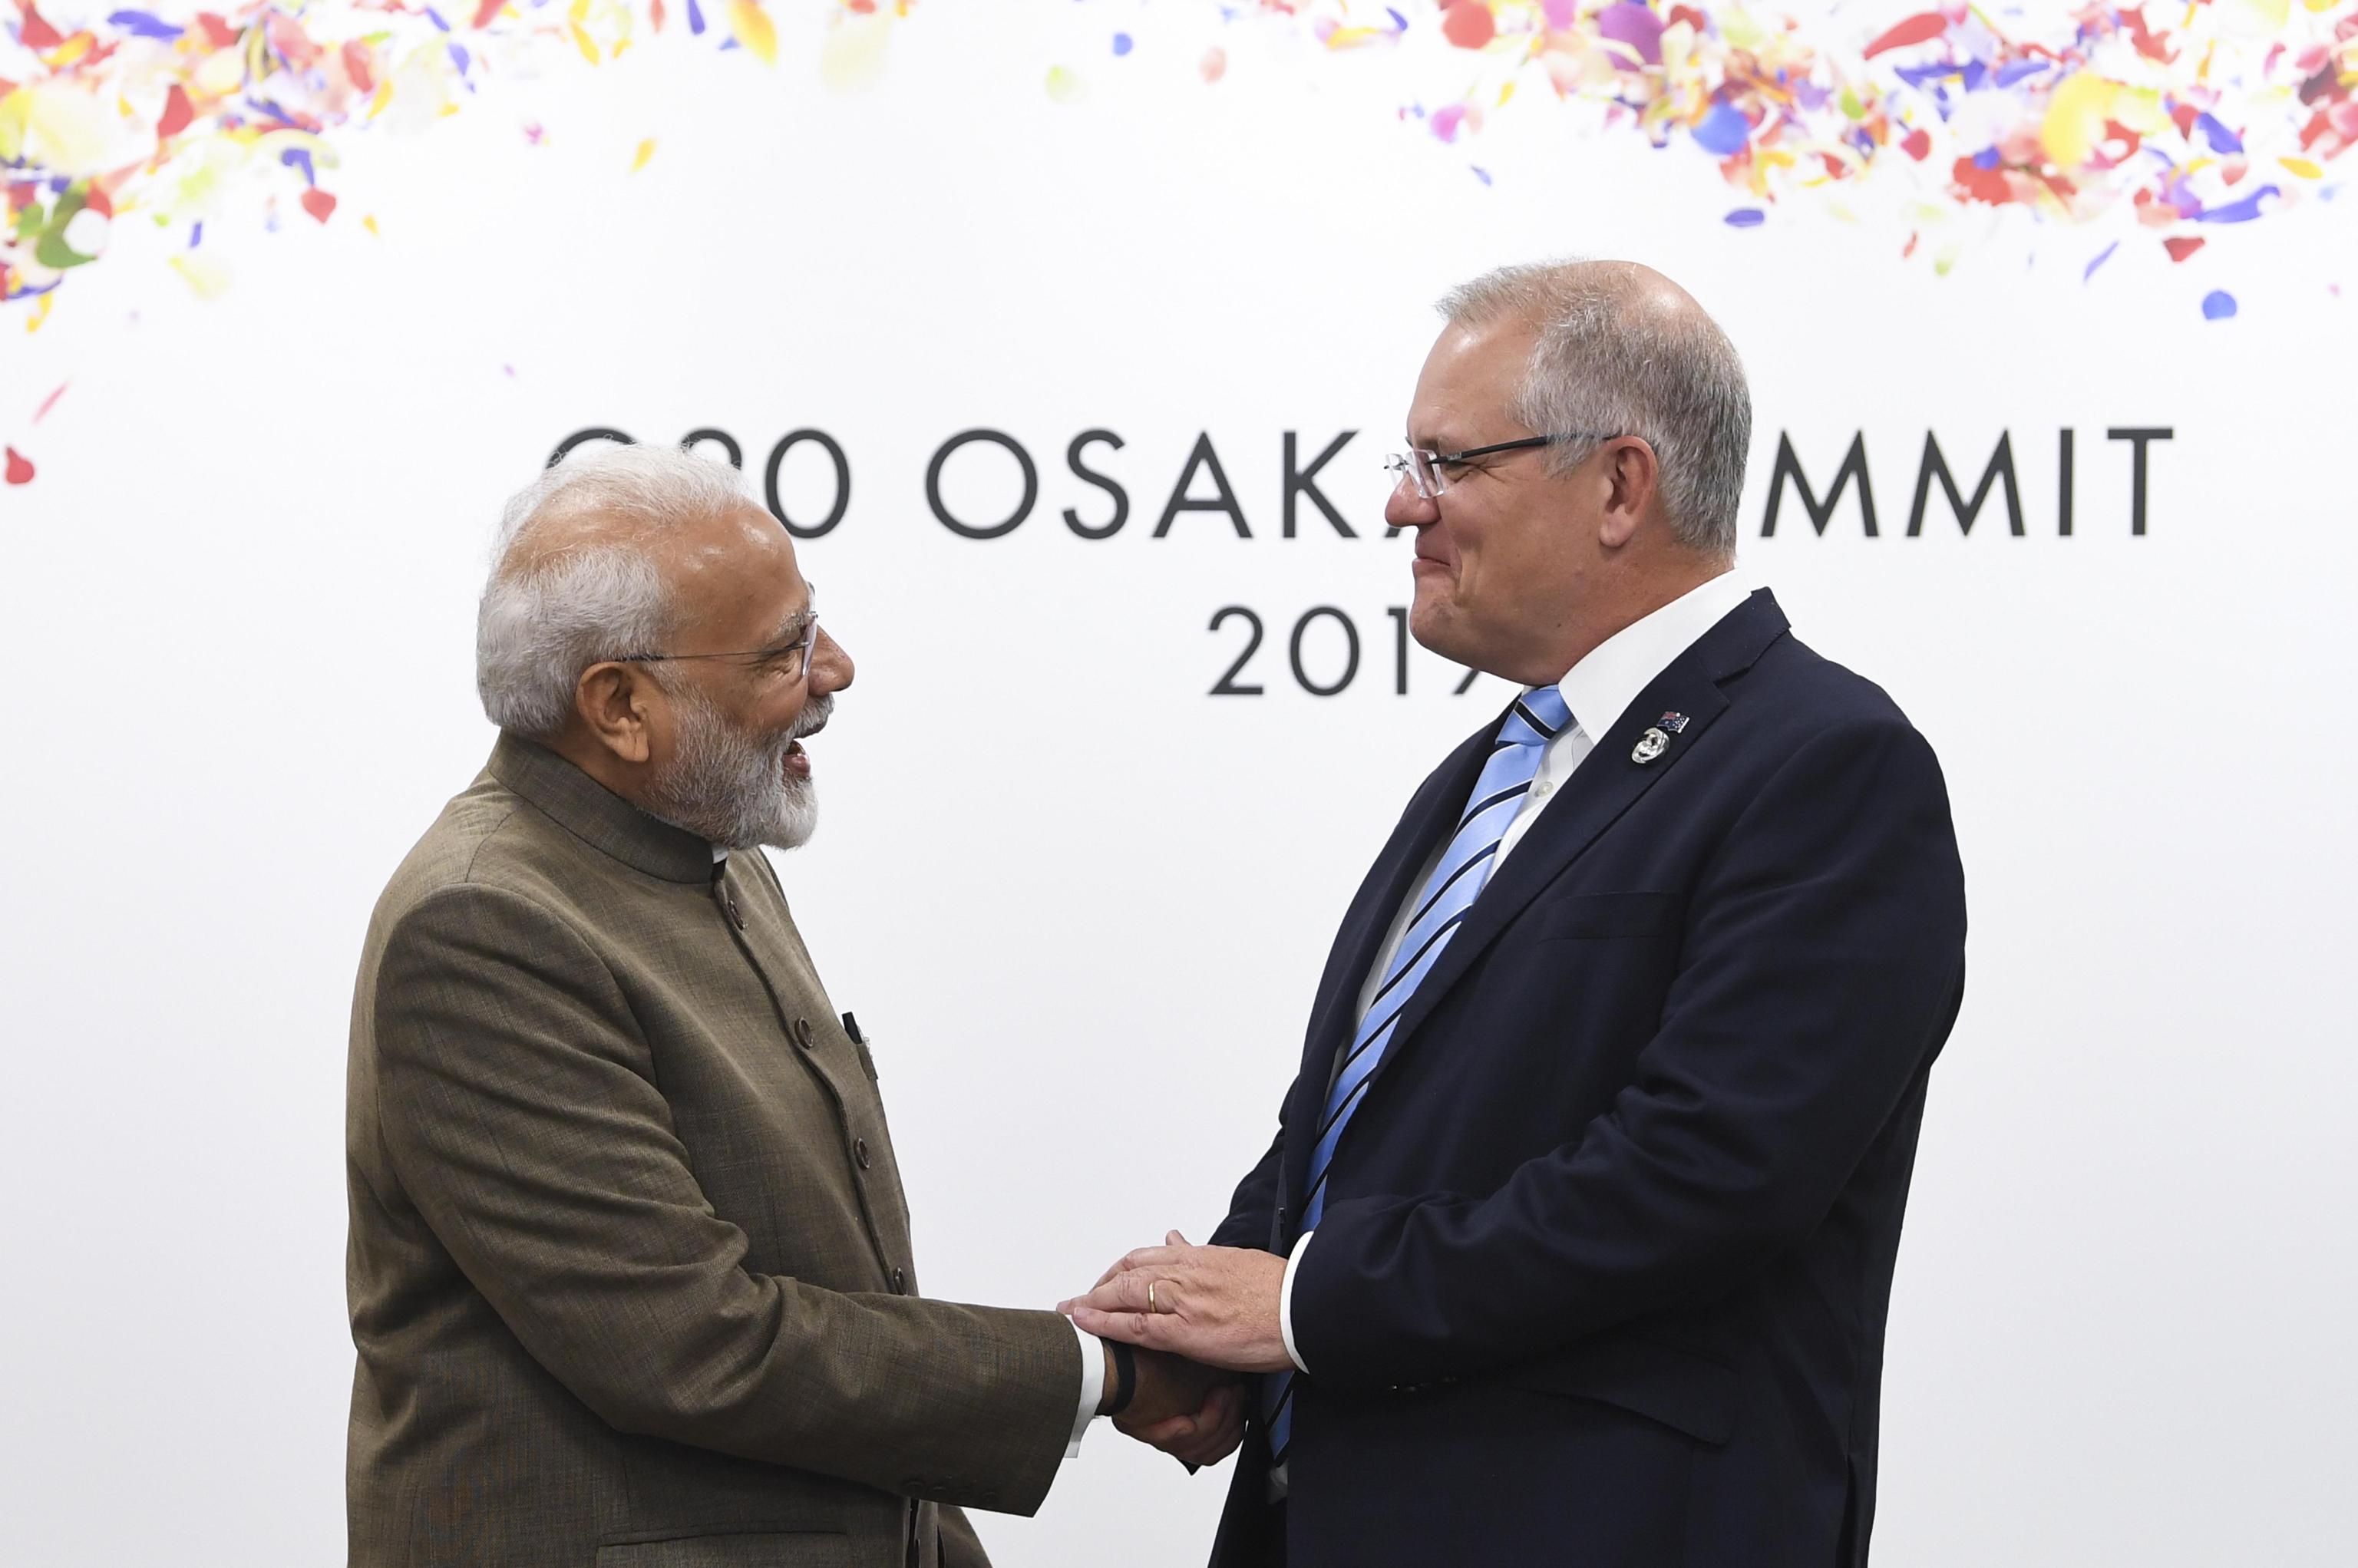 epa07681613 Australian Prime Minister Scott Morrison (R) shakes hands with Indian Prime Minister Narendra Modi (L) during a bilateral meeting on the second day of the G20 summit in Osaka, Japan, 29 June 2019. It is the first time that Japan hosts a G20 summit. The summit gathers leaders from 19 countries and the European Union to discuss topics such as global economy, trade and investment, innovation and employment.  EPA/LUKAS COCH AUSTRALIA AND NEW ZEALAND OUT